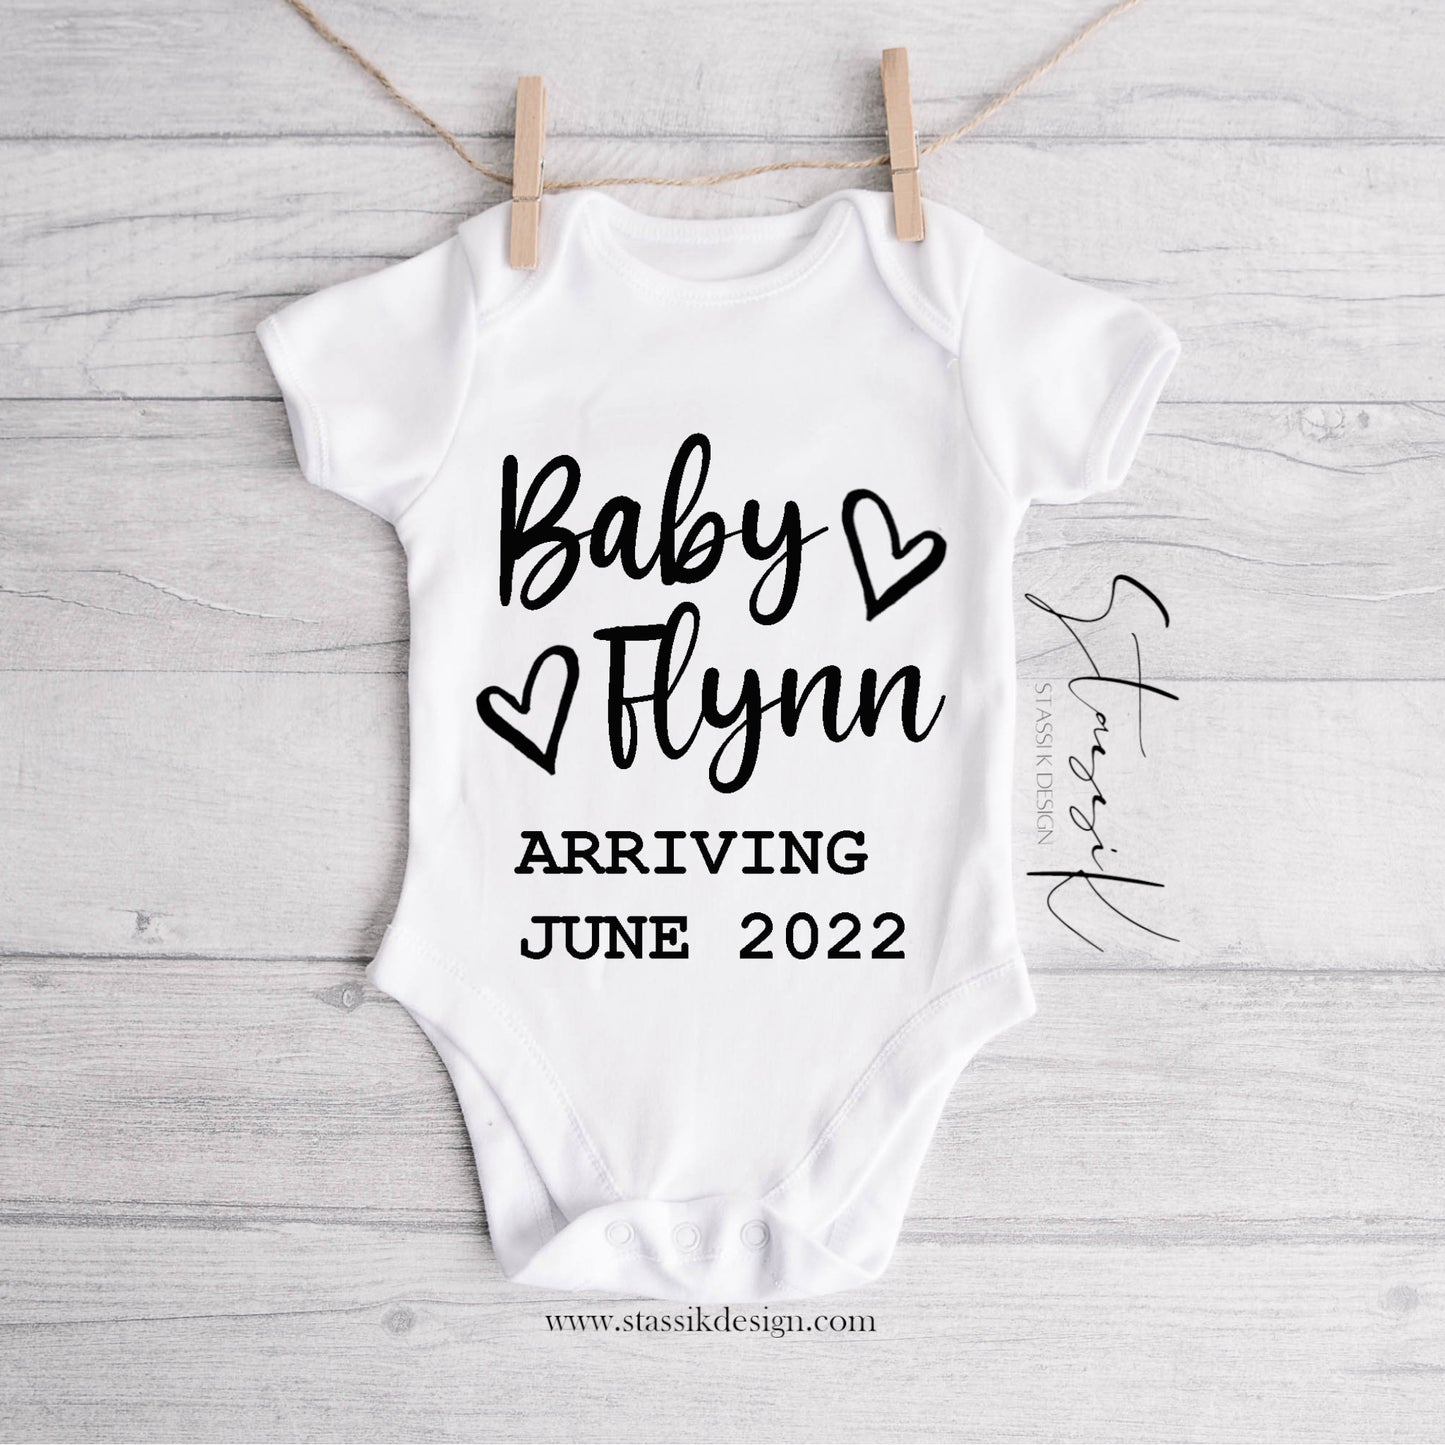 Personalised Pregnancy Announcement Baby Vest - Name & Date